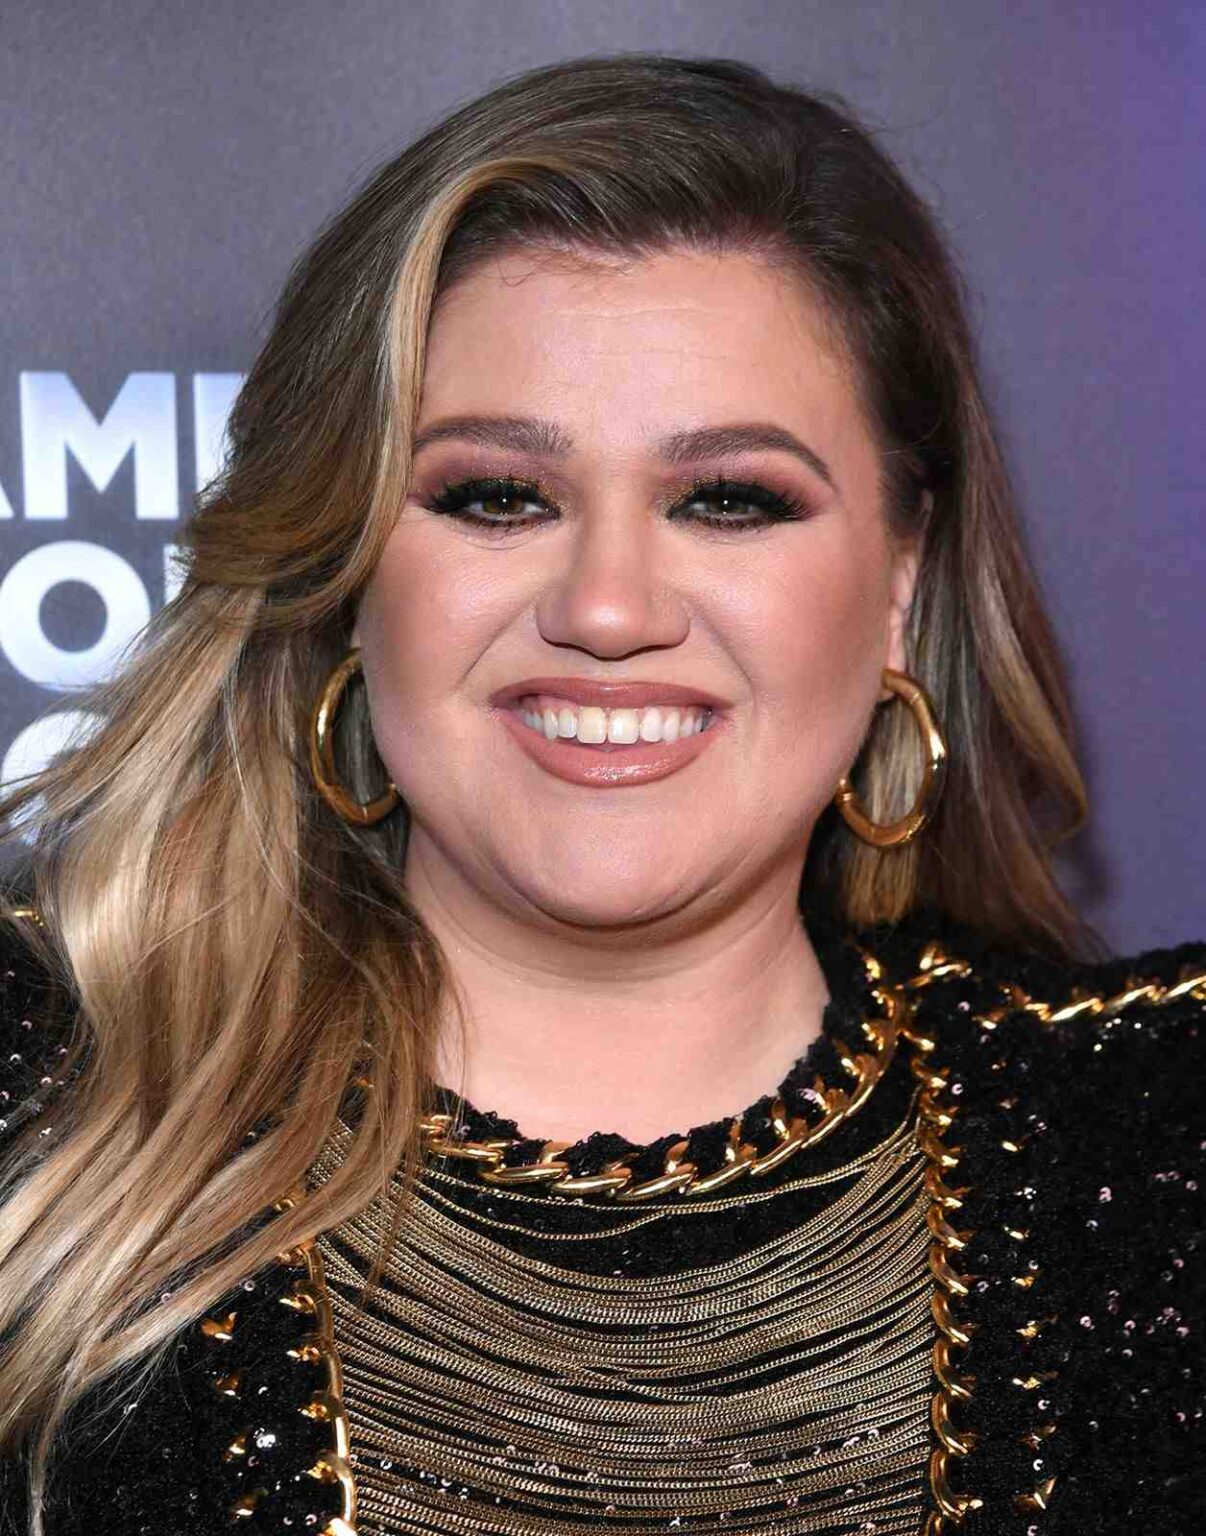 Discover how the 'Since U Been Gone' singer's net worth took a hiccupping dive post her fat-shaming gaffes. Is the Kelly Clarkson net worth saga over or just pausing for breath? Tune in!